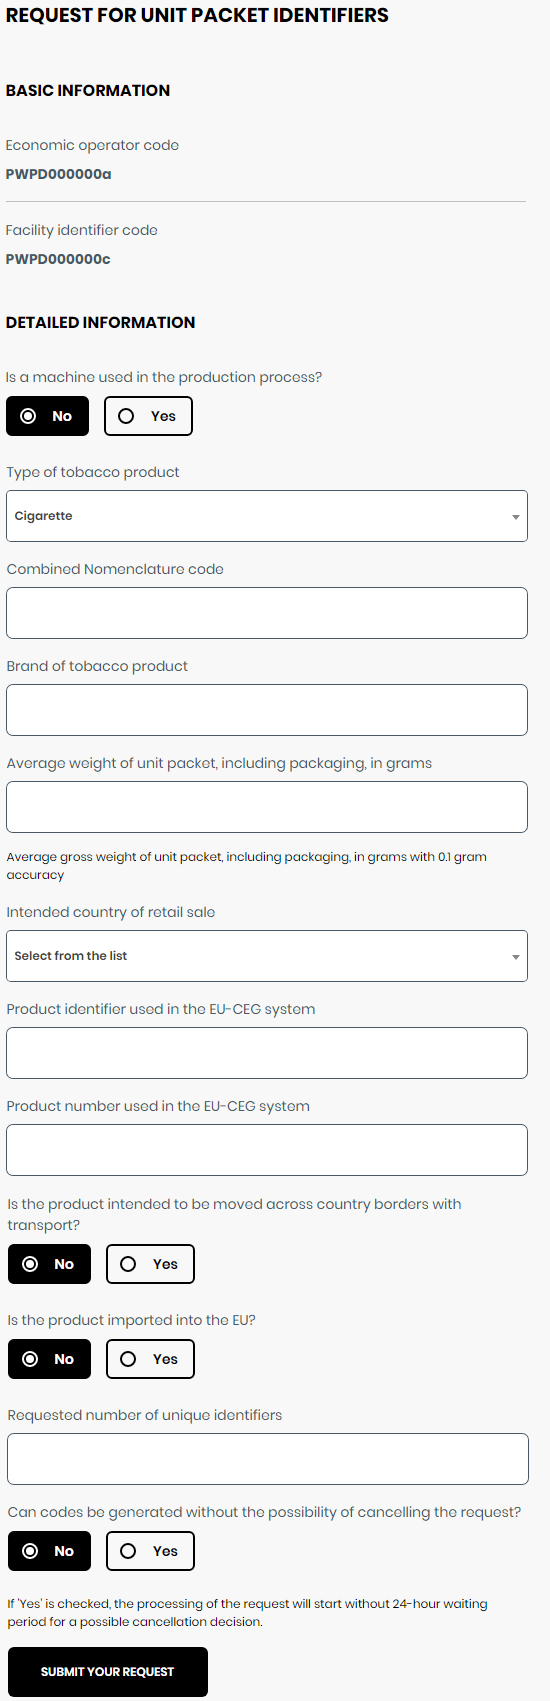 Application for unit pack identifiers